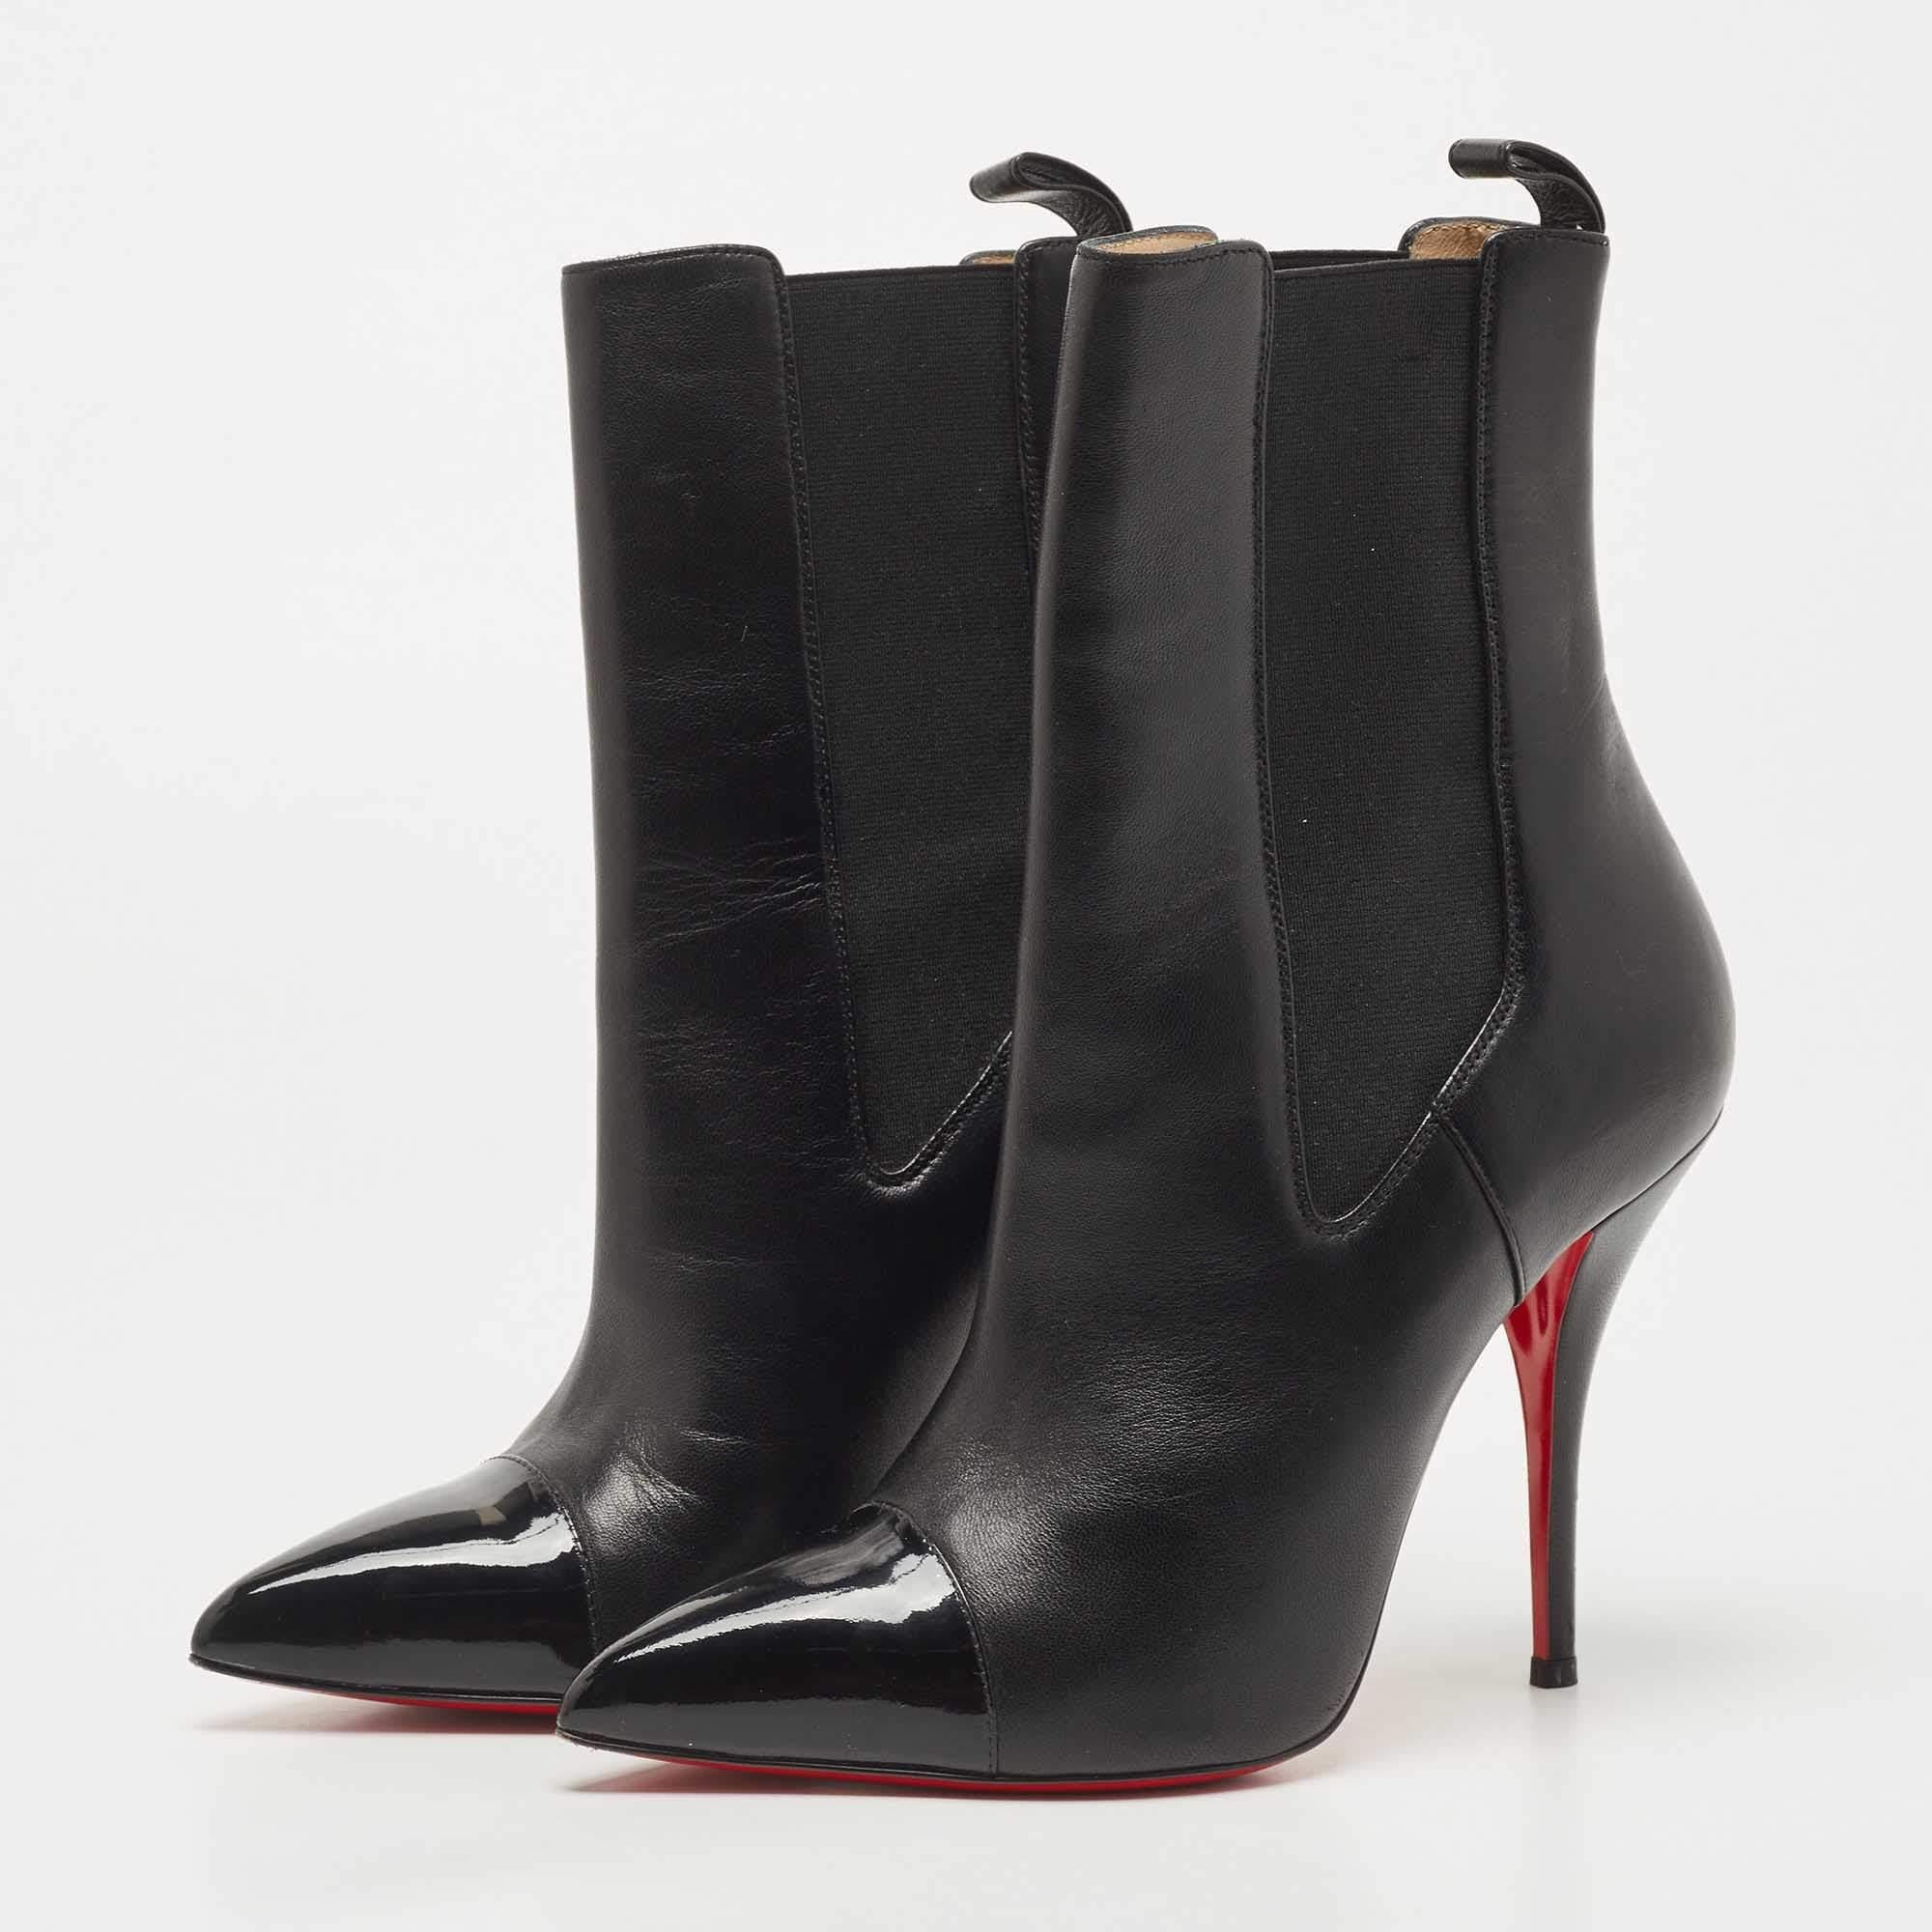 Women's Christian Louboutin Black Leather and Patent Tuscon Booties Size 38